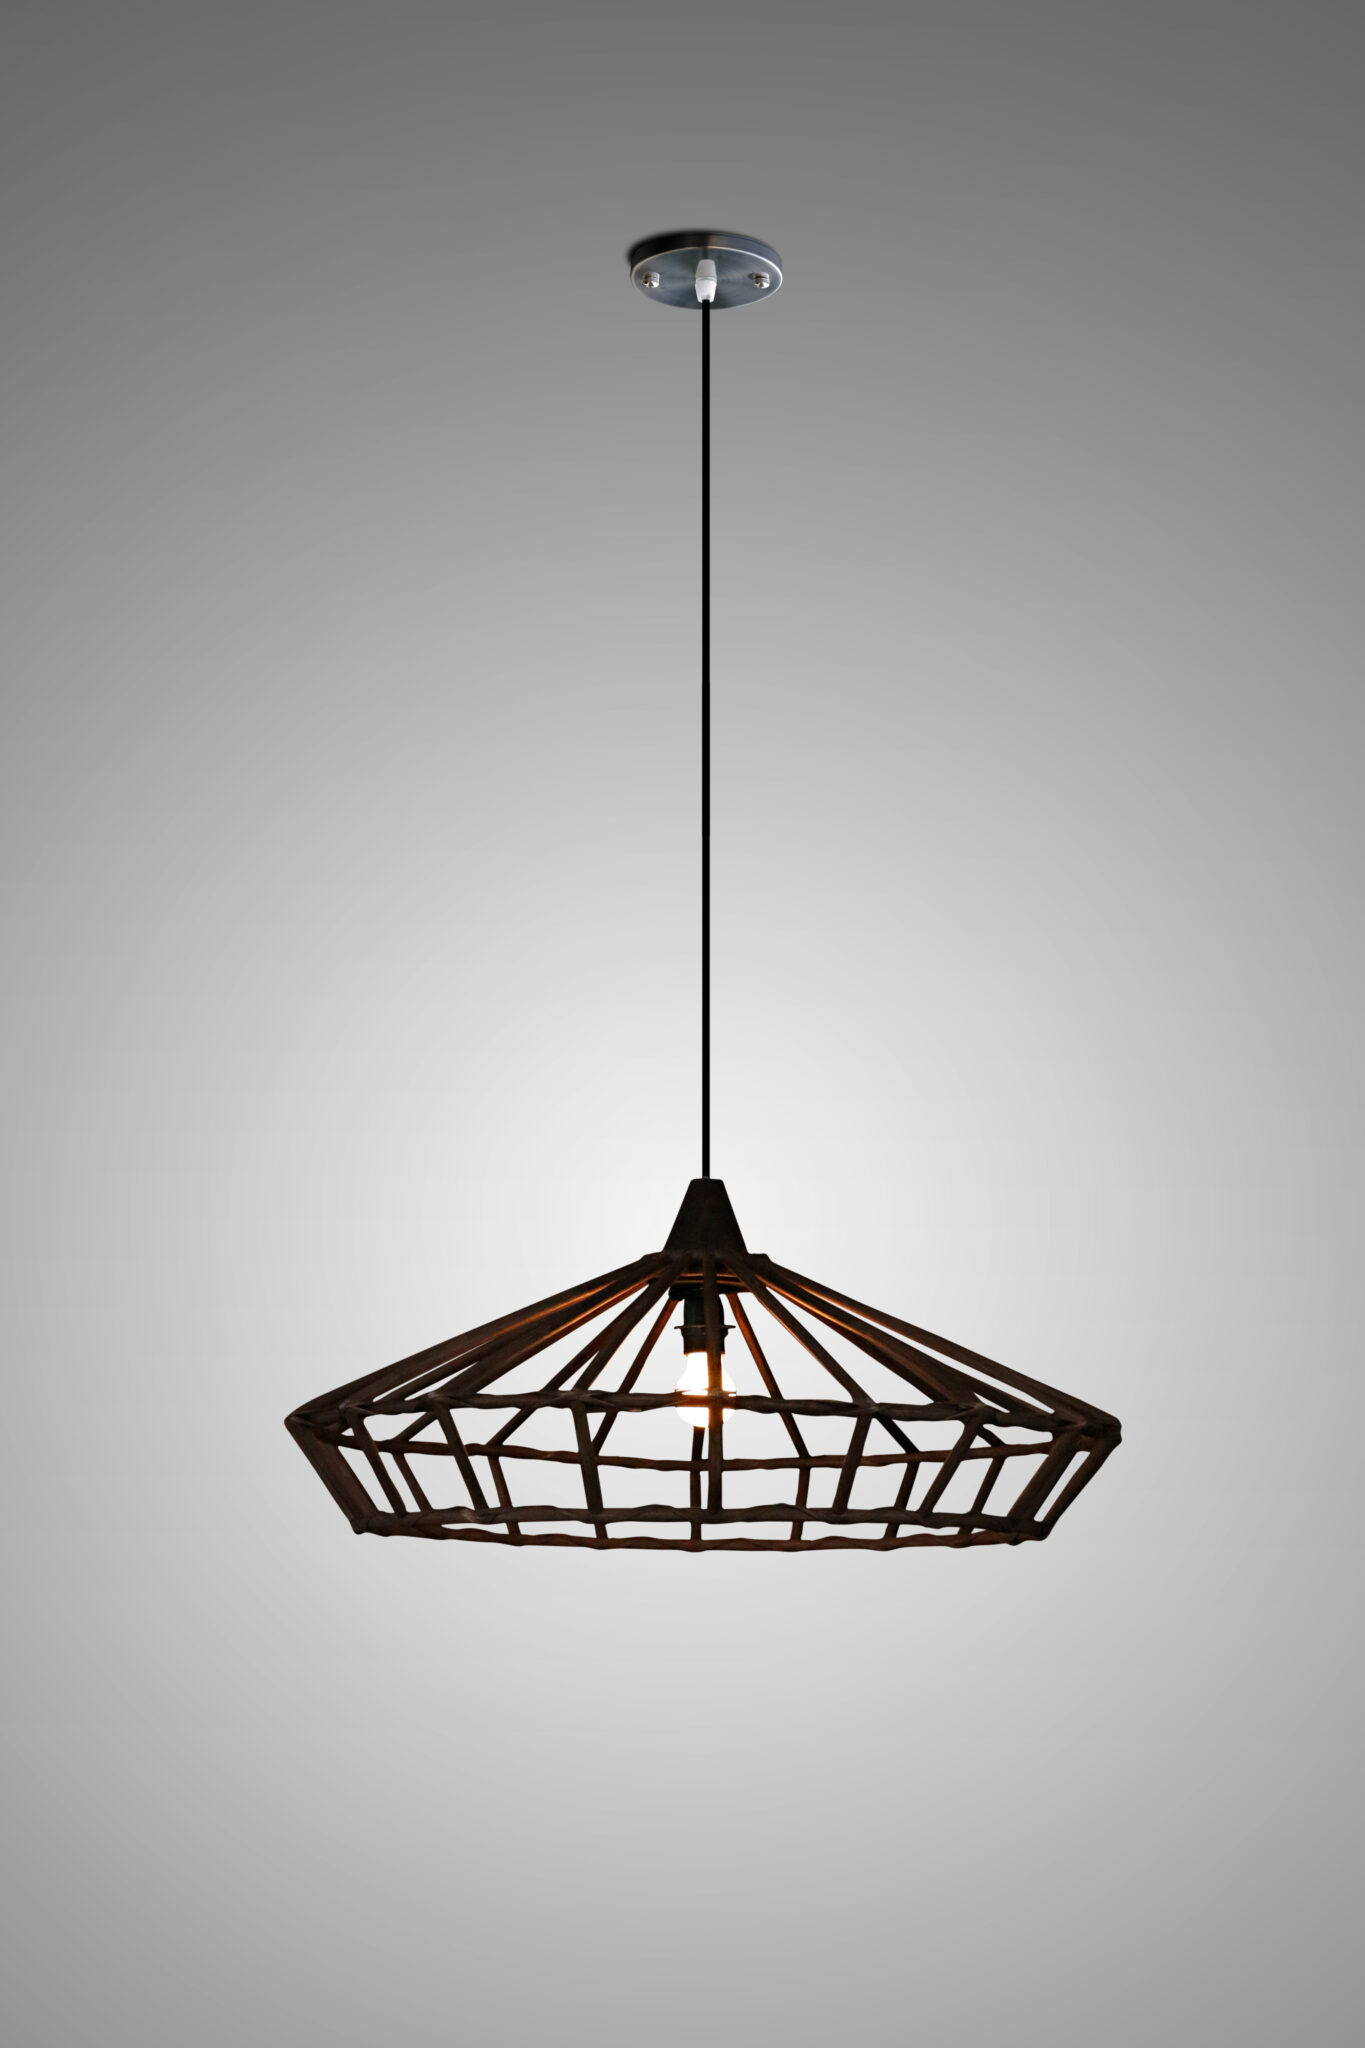 Discover the Stunning Silver Pendant Light for Your Home Decor